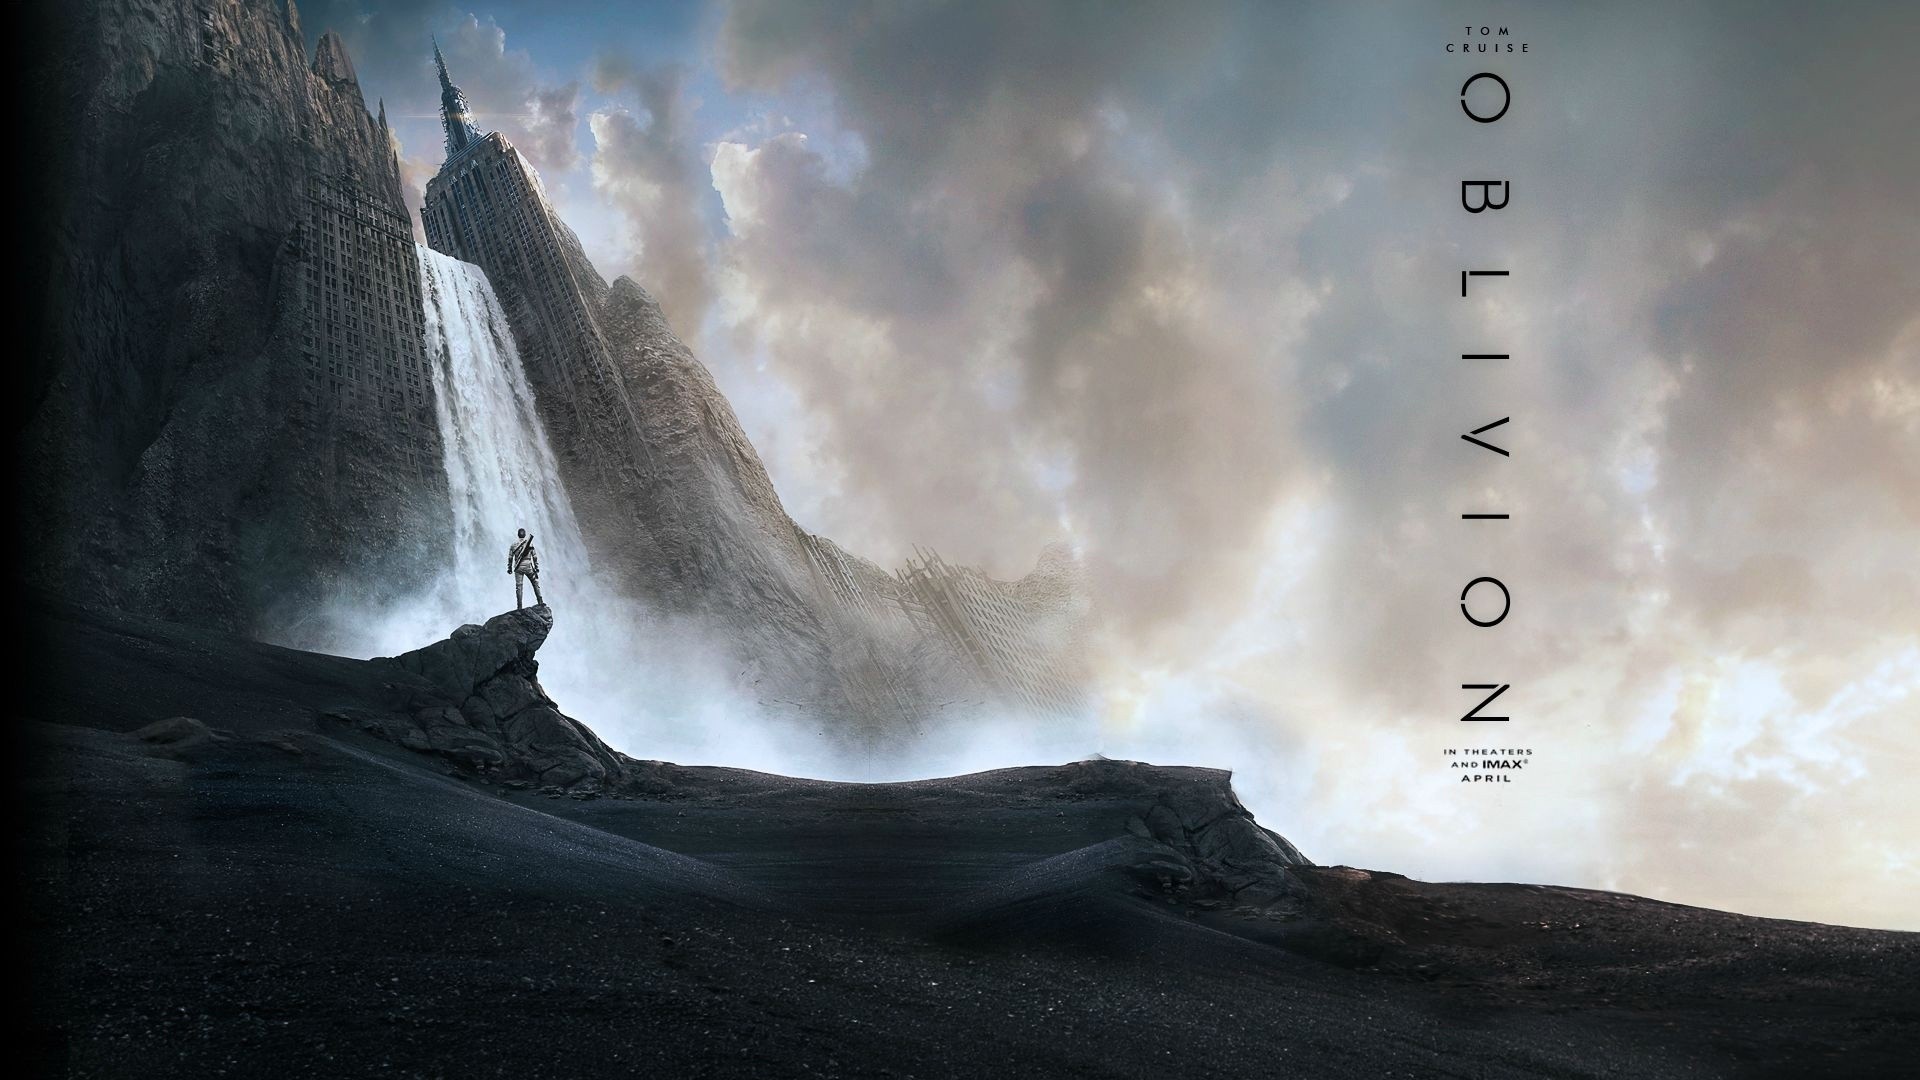 General 1920x1080 movies Oblivion (movie) Tom Cruise science fiction alone apocalyptic Universal Pictures